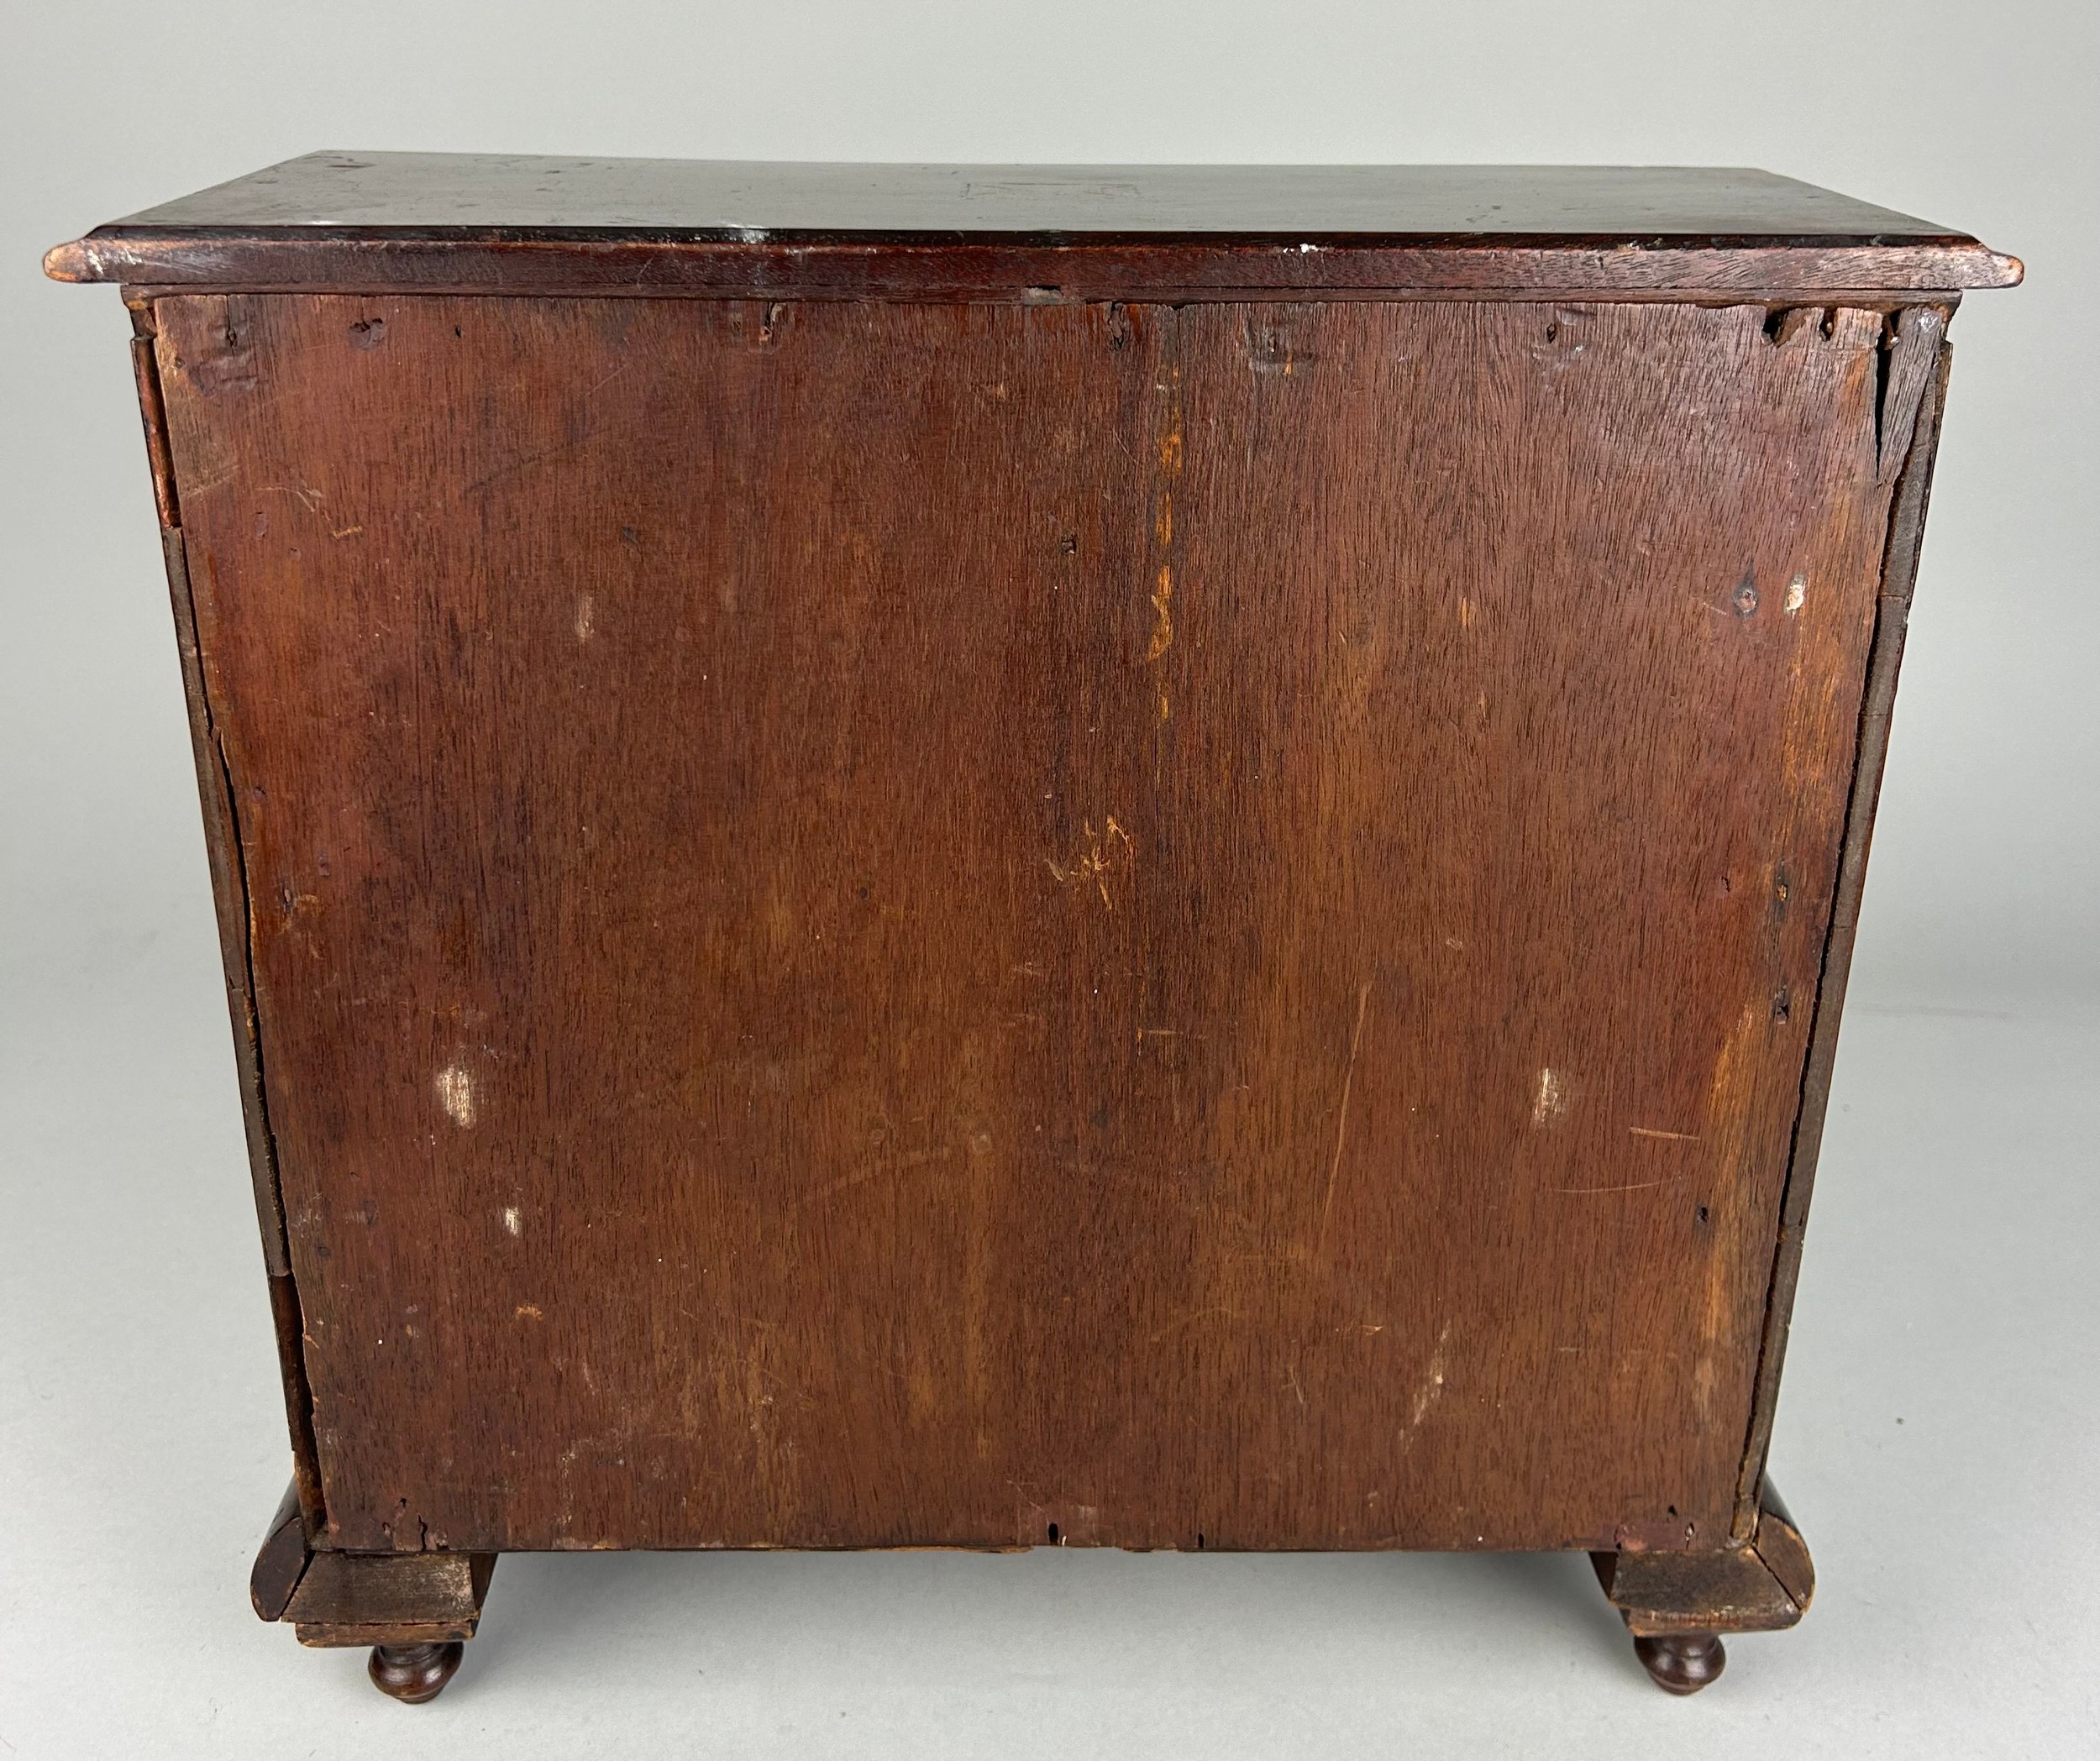 AN EARLY 19TH CENTURY APPRENTICE CHEST OF DRAWERS, With parquetry inlay raised on turned feet. - Image 4 of 5